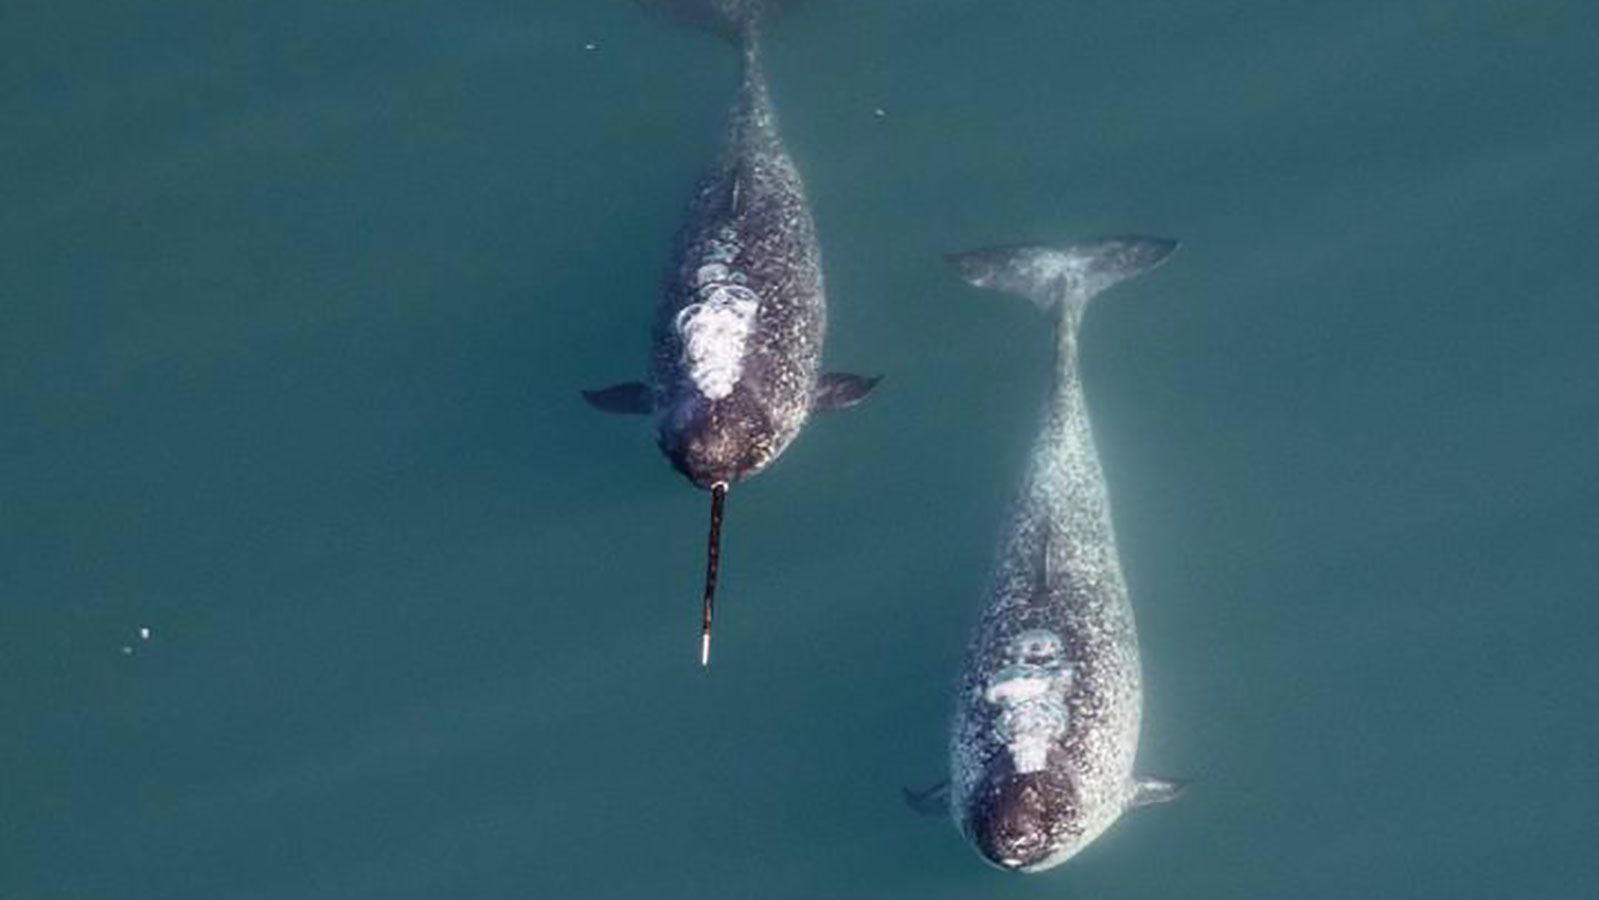 The tusks of male narwhals can grow up to 8 feet long. 